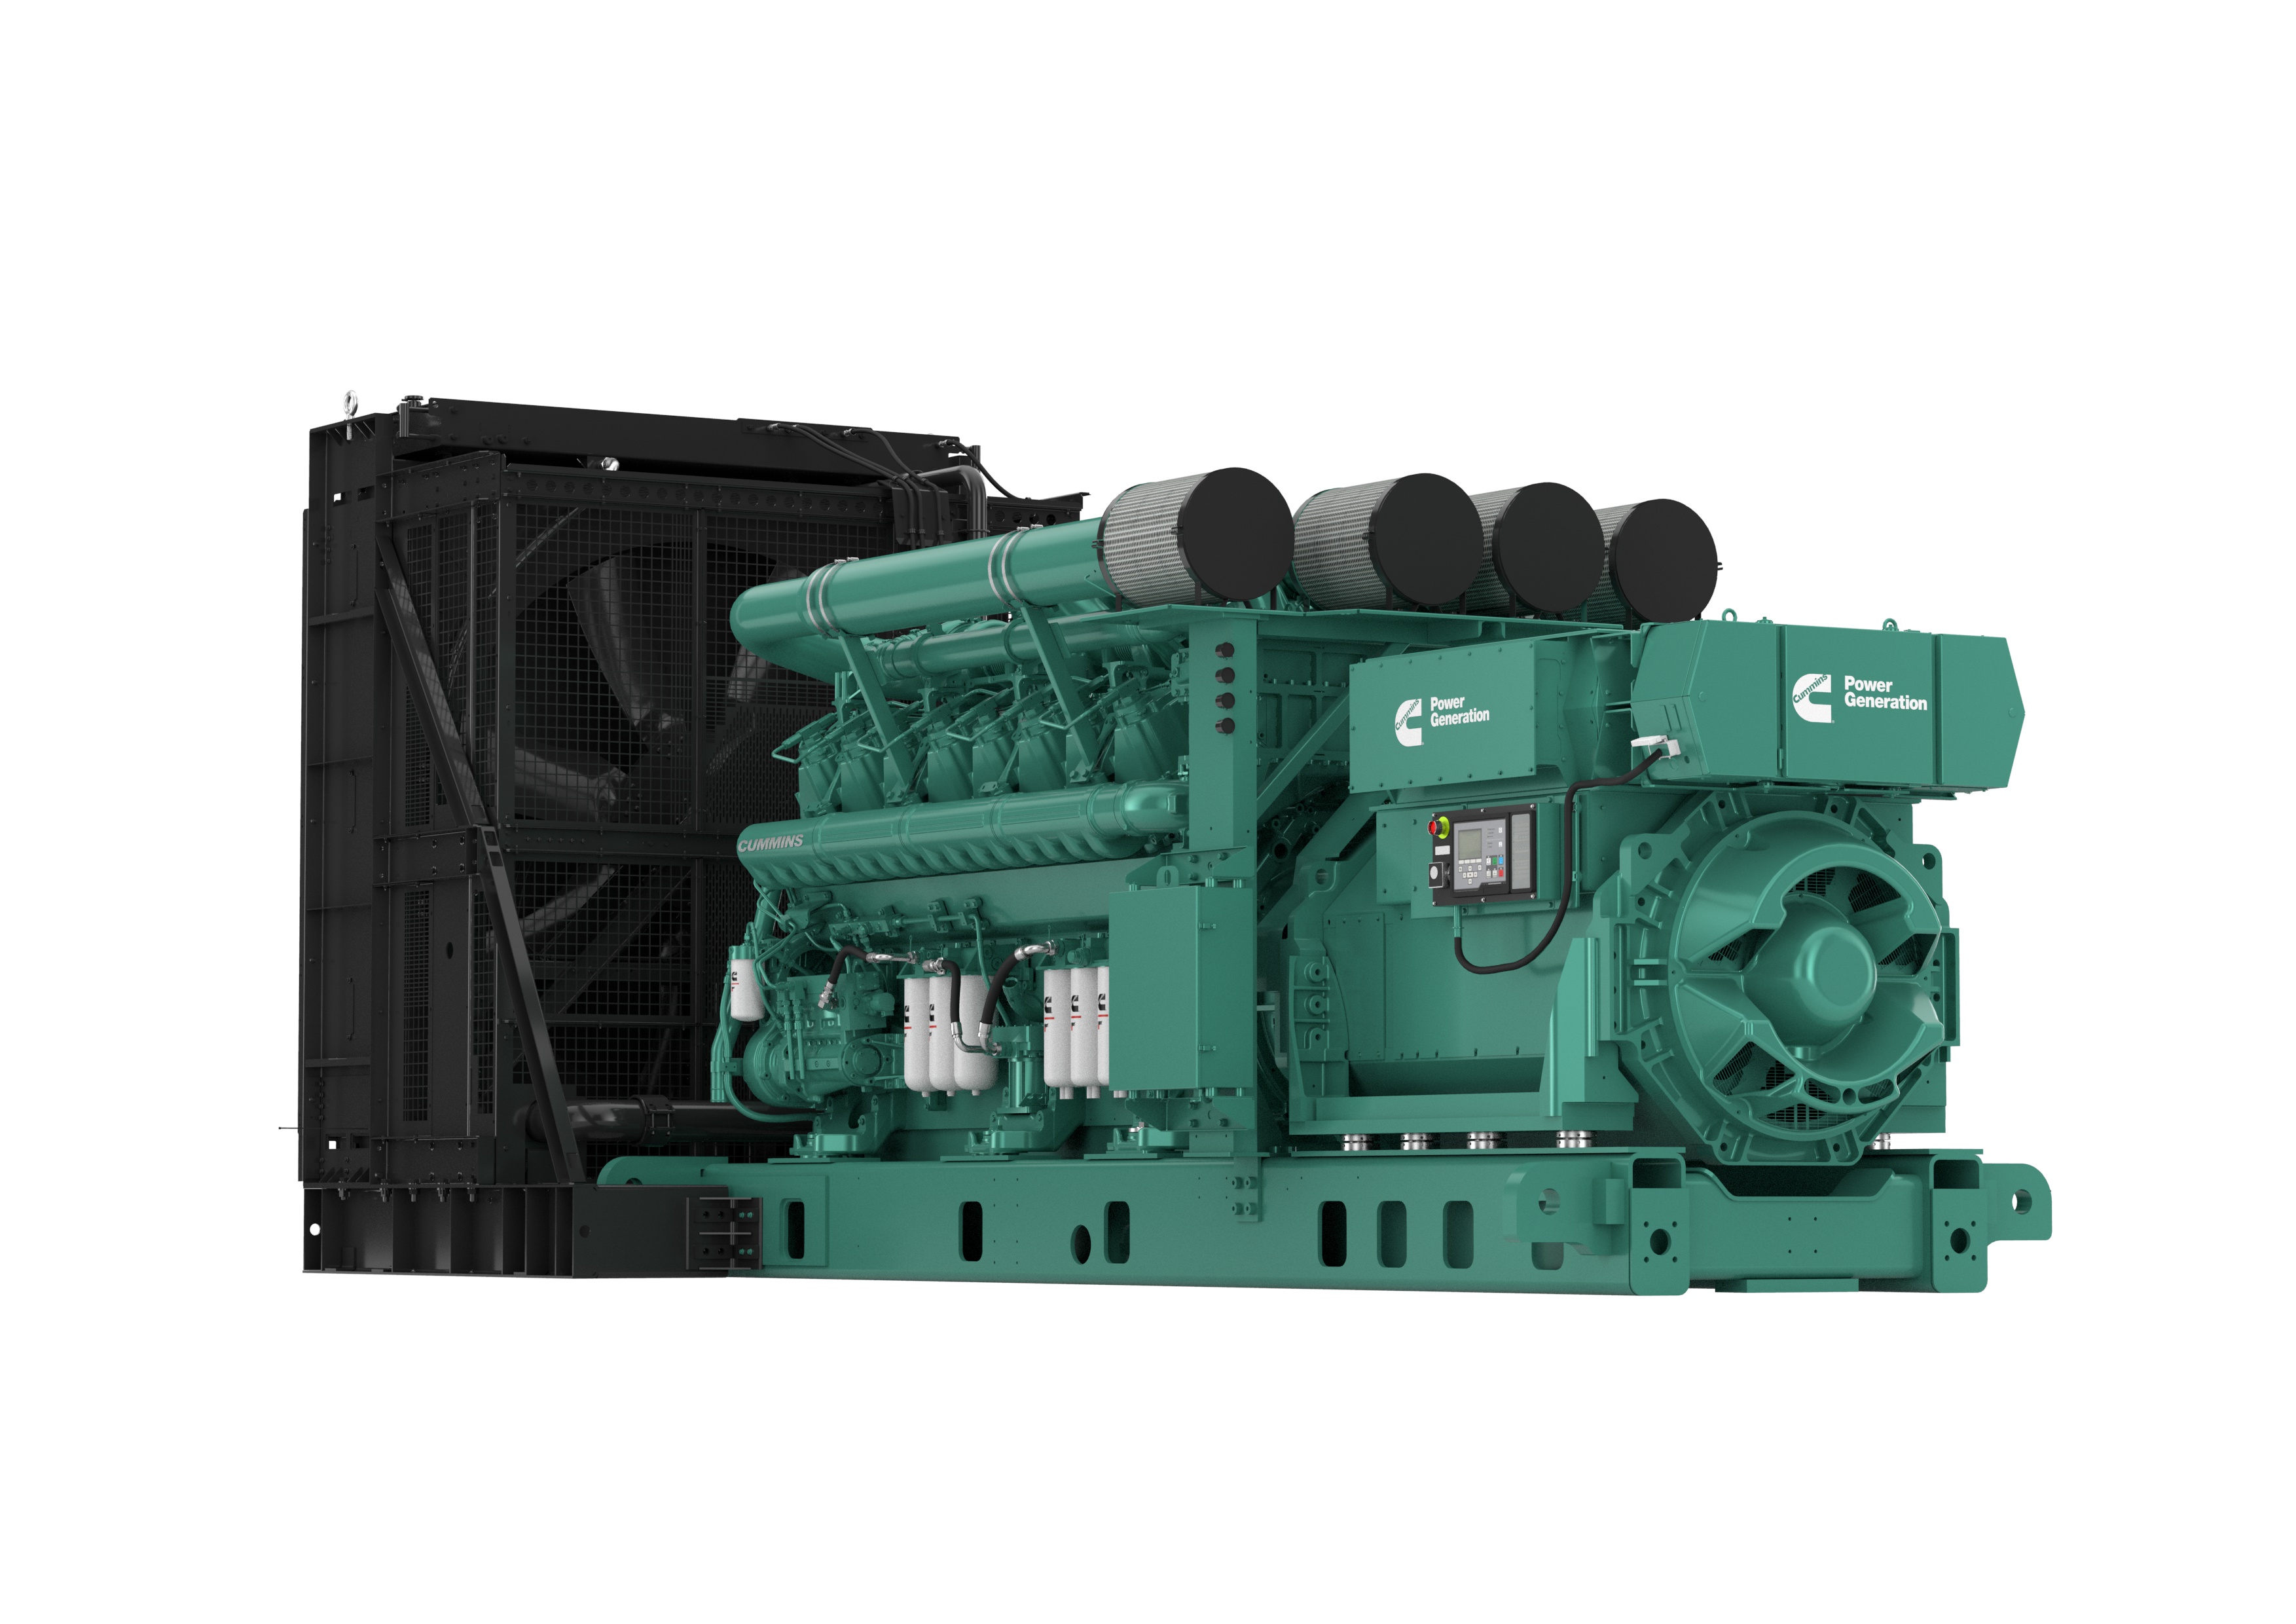 Cummins high horsepower diesel generator now approved for use with hydrotreated vegetable fuel Cummins